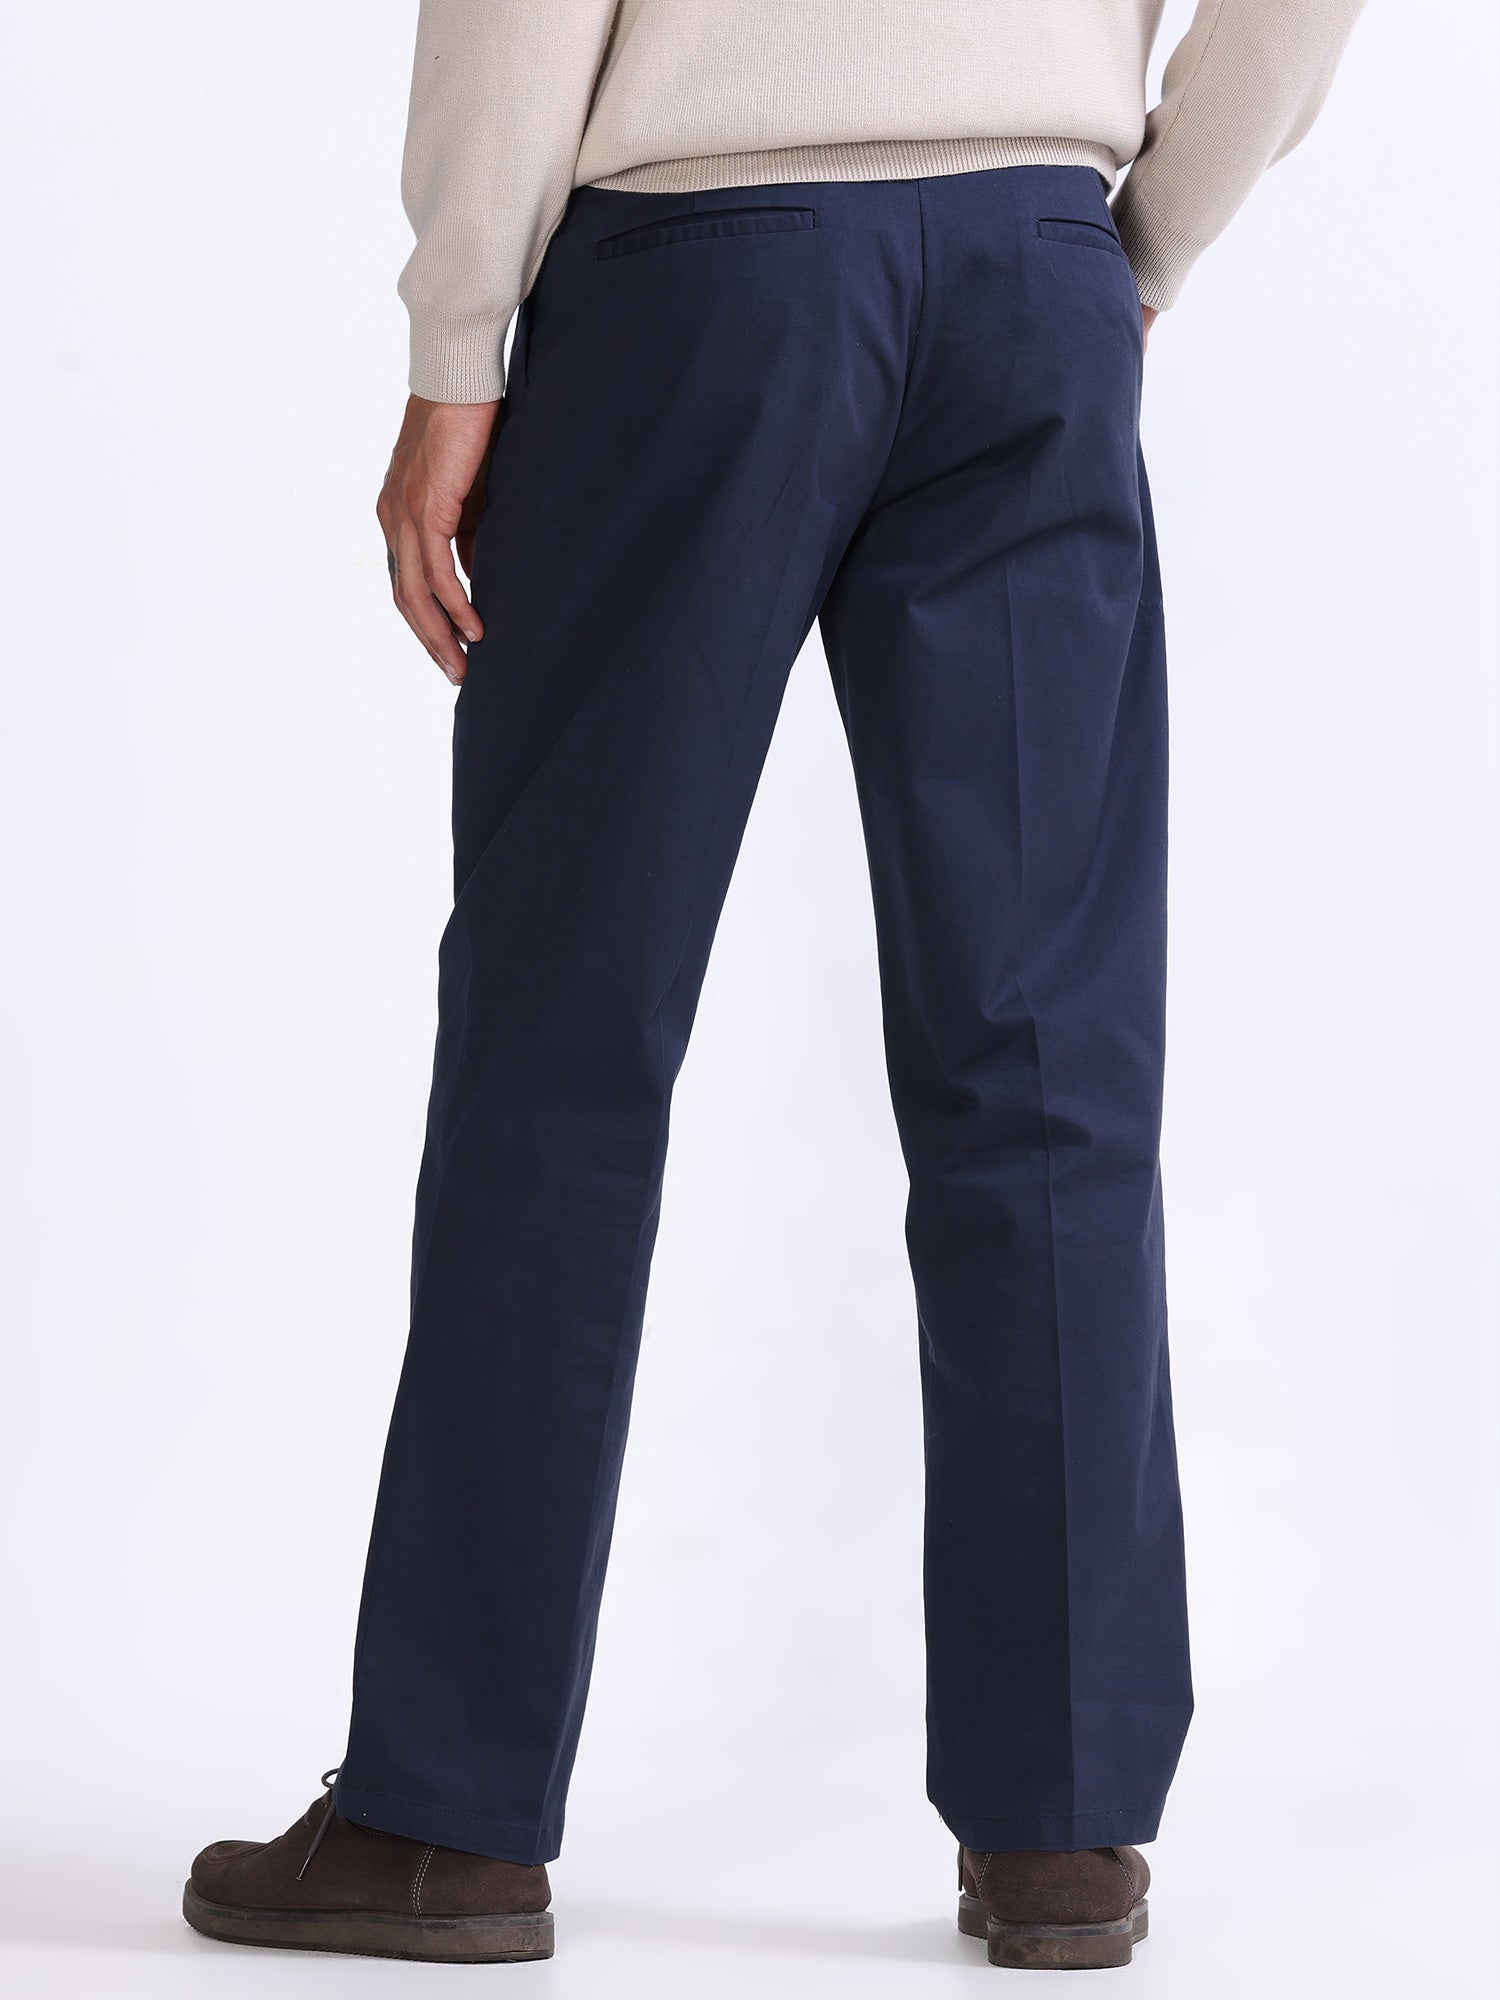 corporate trouser blue |trouser | navy blue trousers | trousers supplier  india